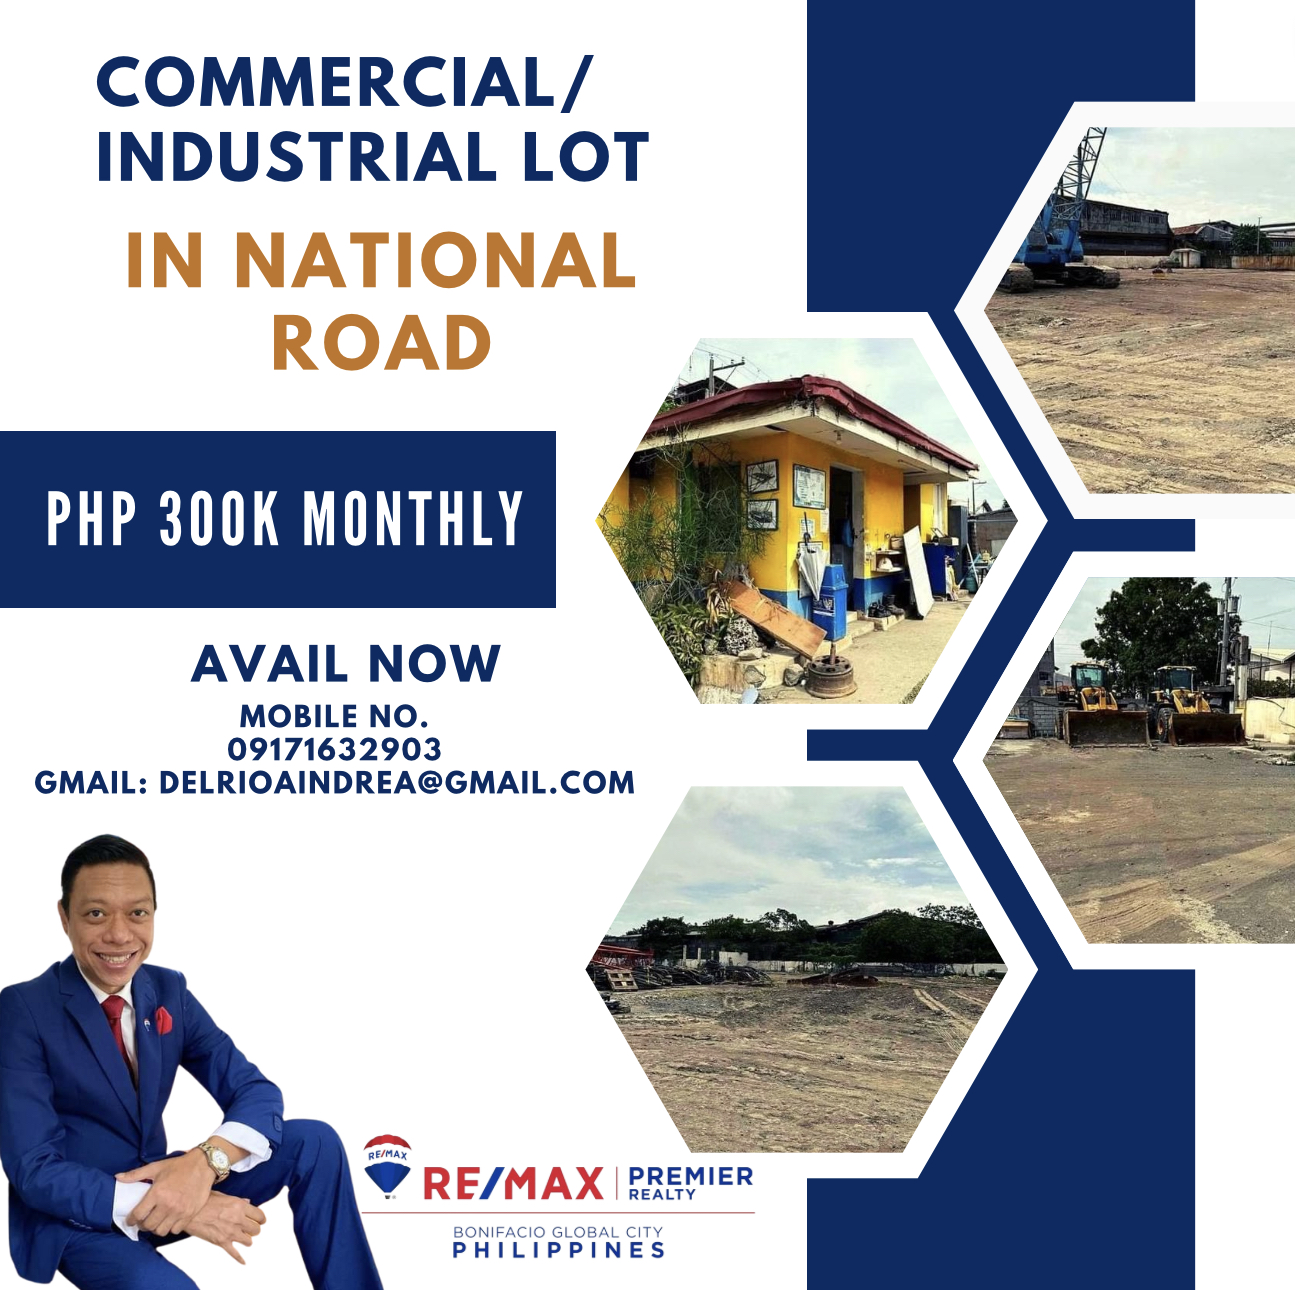 COMMERCIAL / INDUSTRIAL LOT FOR LEASE in National Road‼️